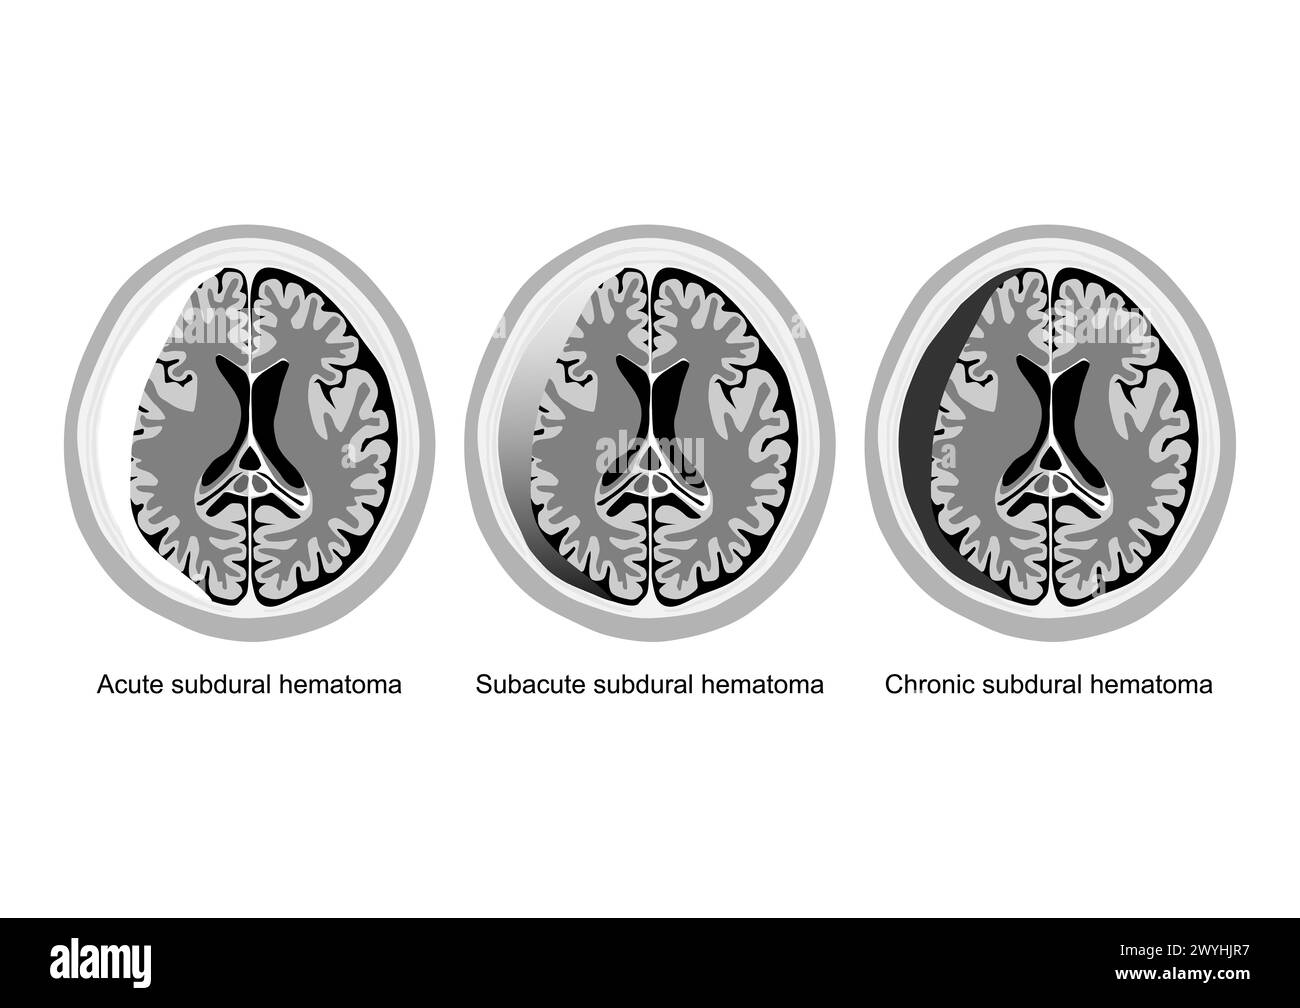 Three medical illustrations showing acute, subacute, and chronic subdural hematoma stages in brain injury. Stock Vector